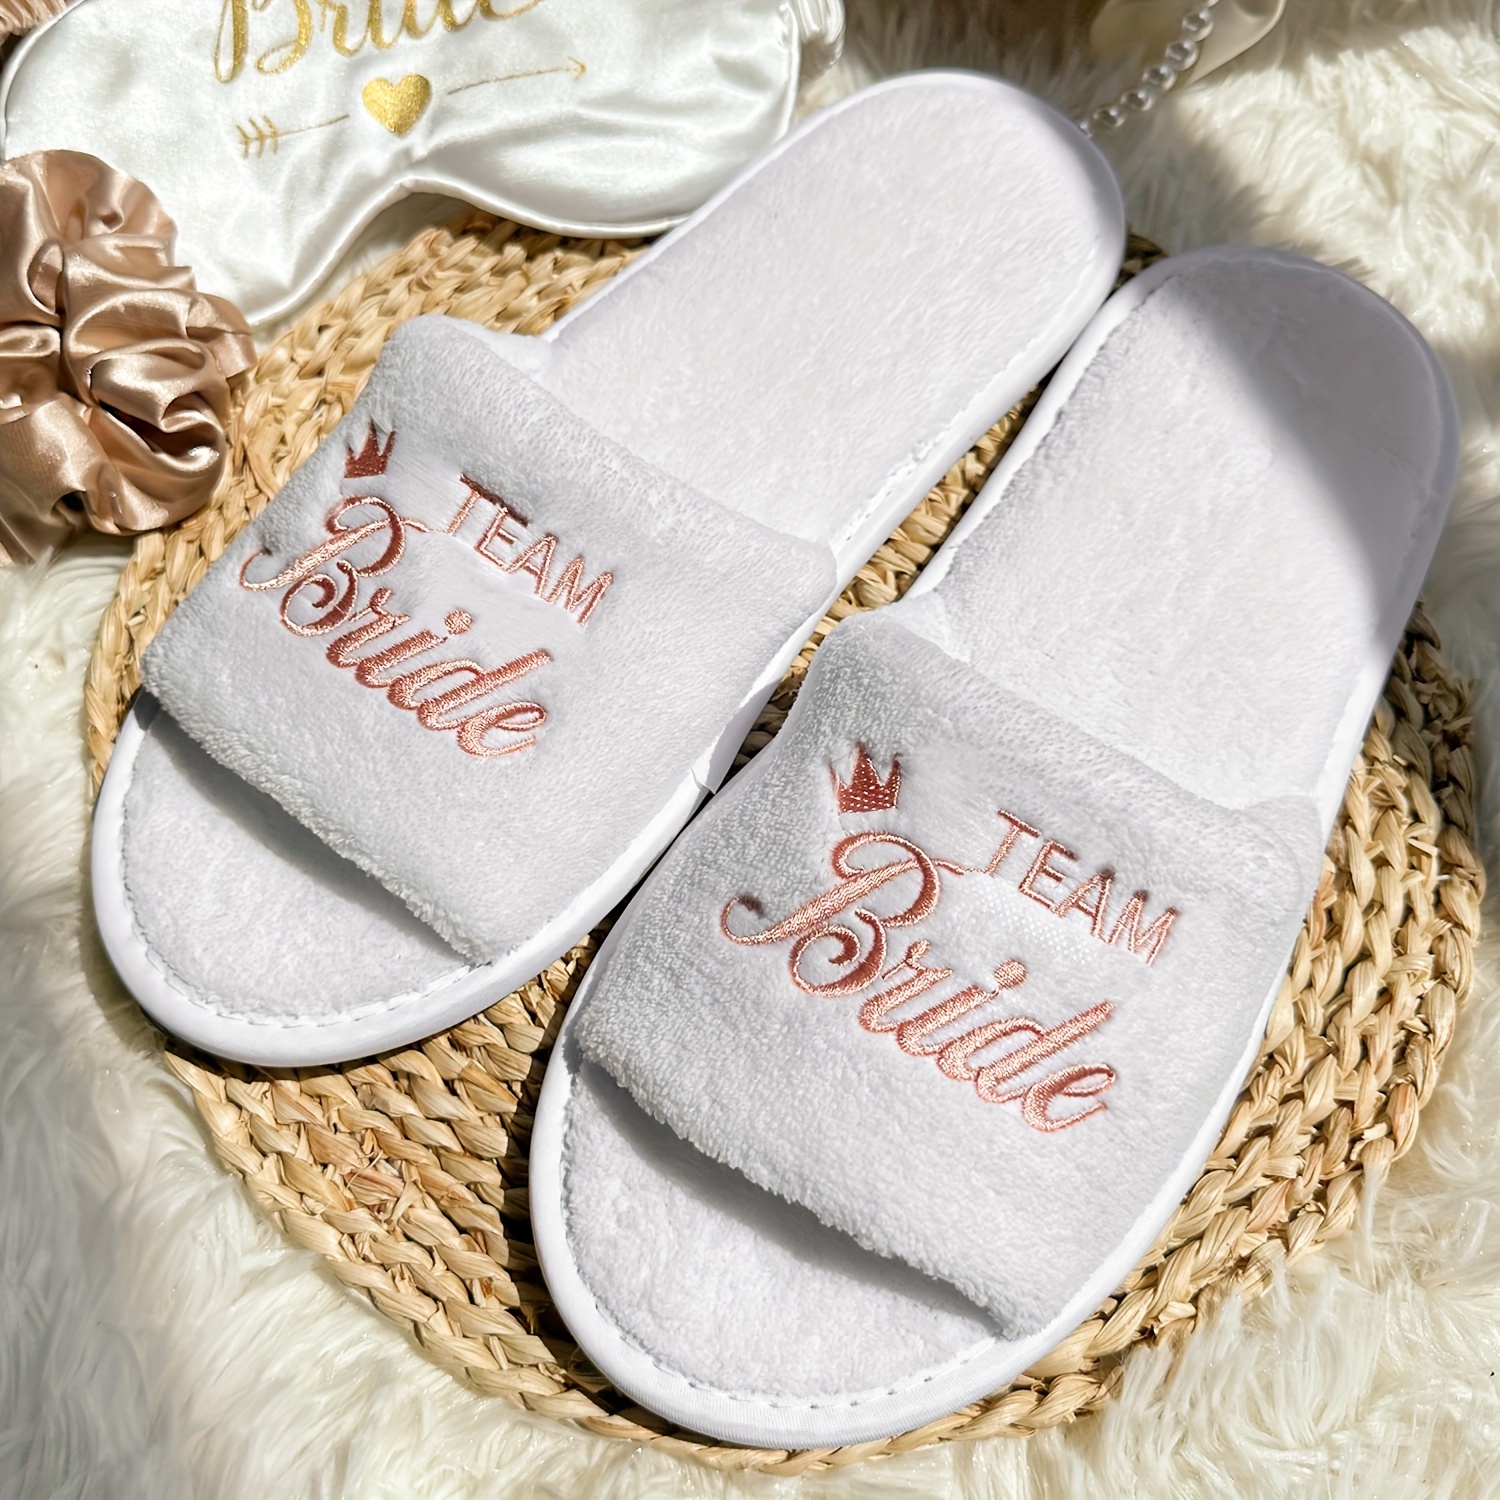 

Bridal Party Slippers Set, Open-toe With Golden, Mint Green And Pink Embroidery, Lightweight Plush Cozy Flats, Non-slip Soft Sole For Bride & Bridesmaid, Wedding Party Guests Home Slip On Shoes